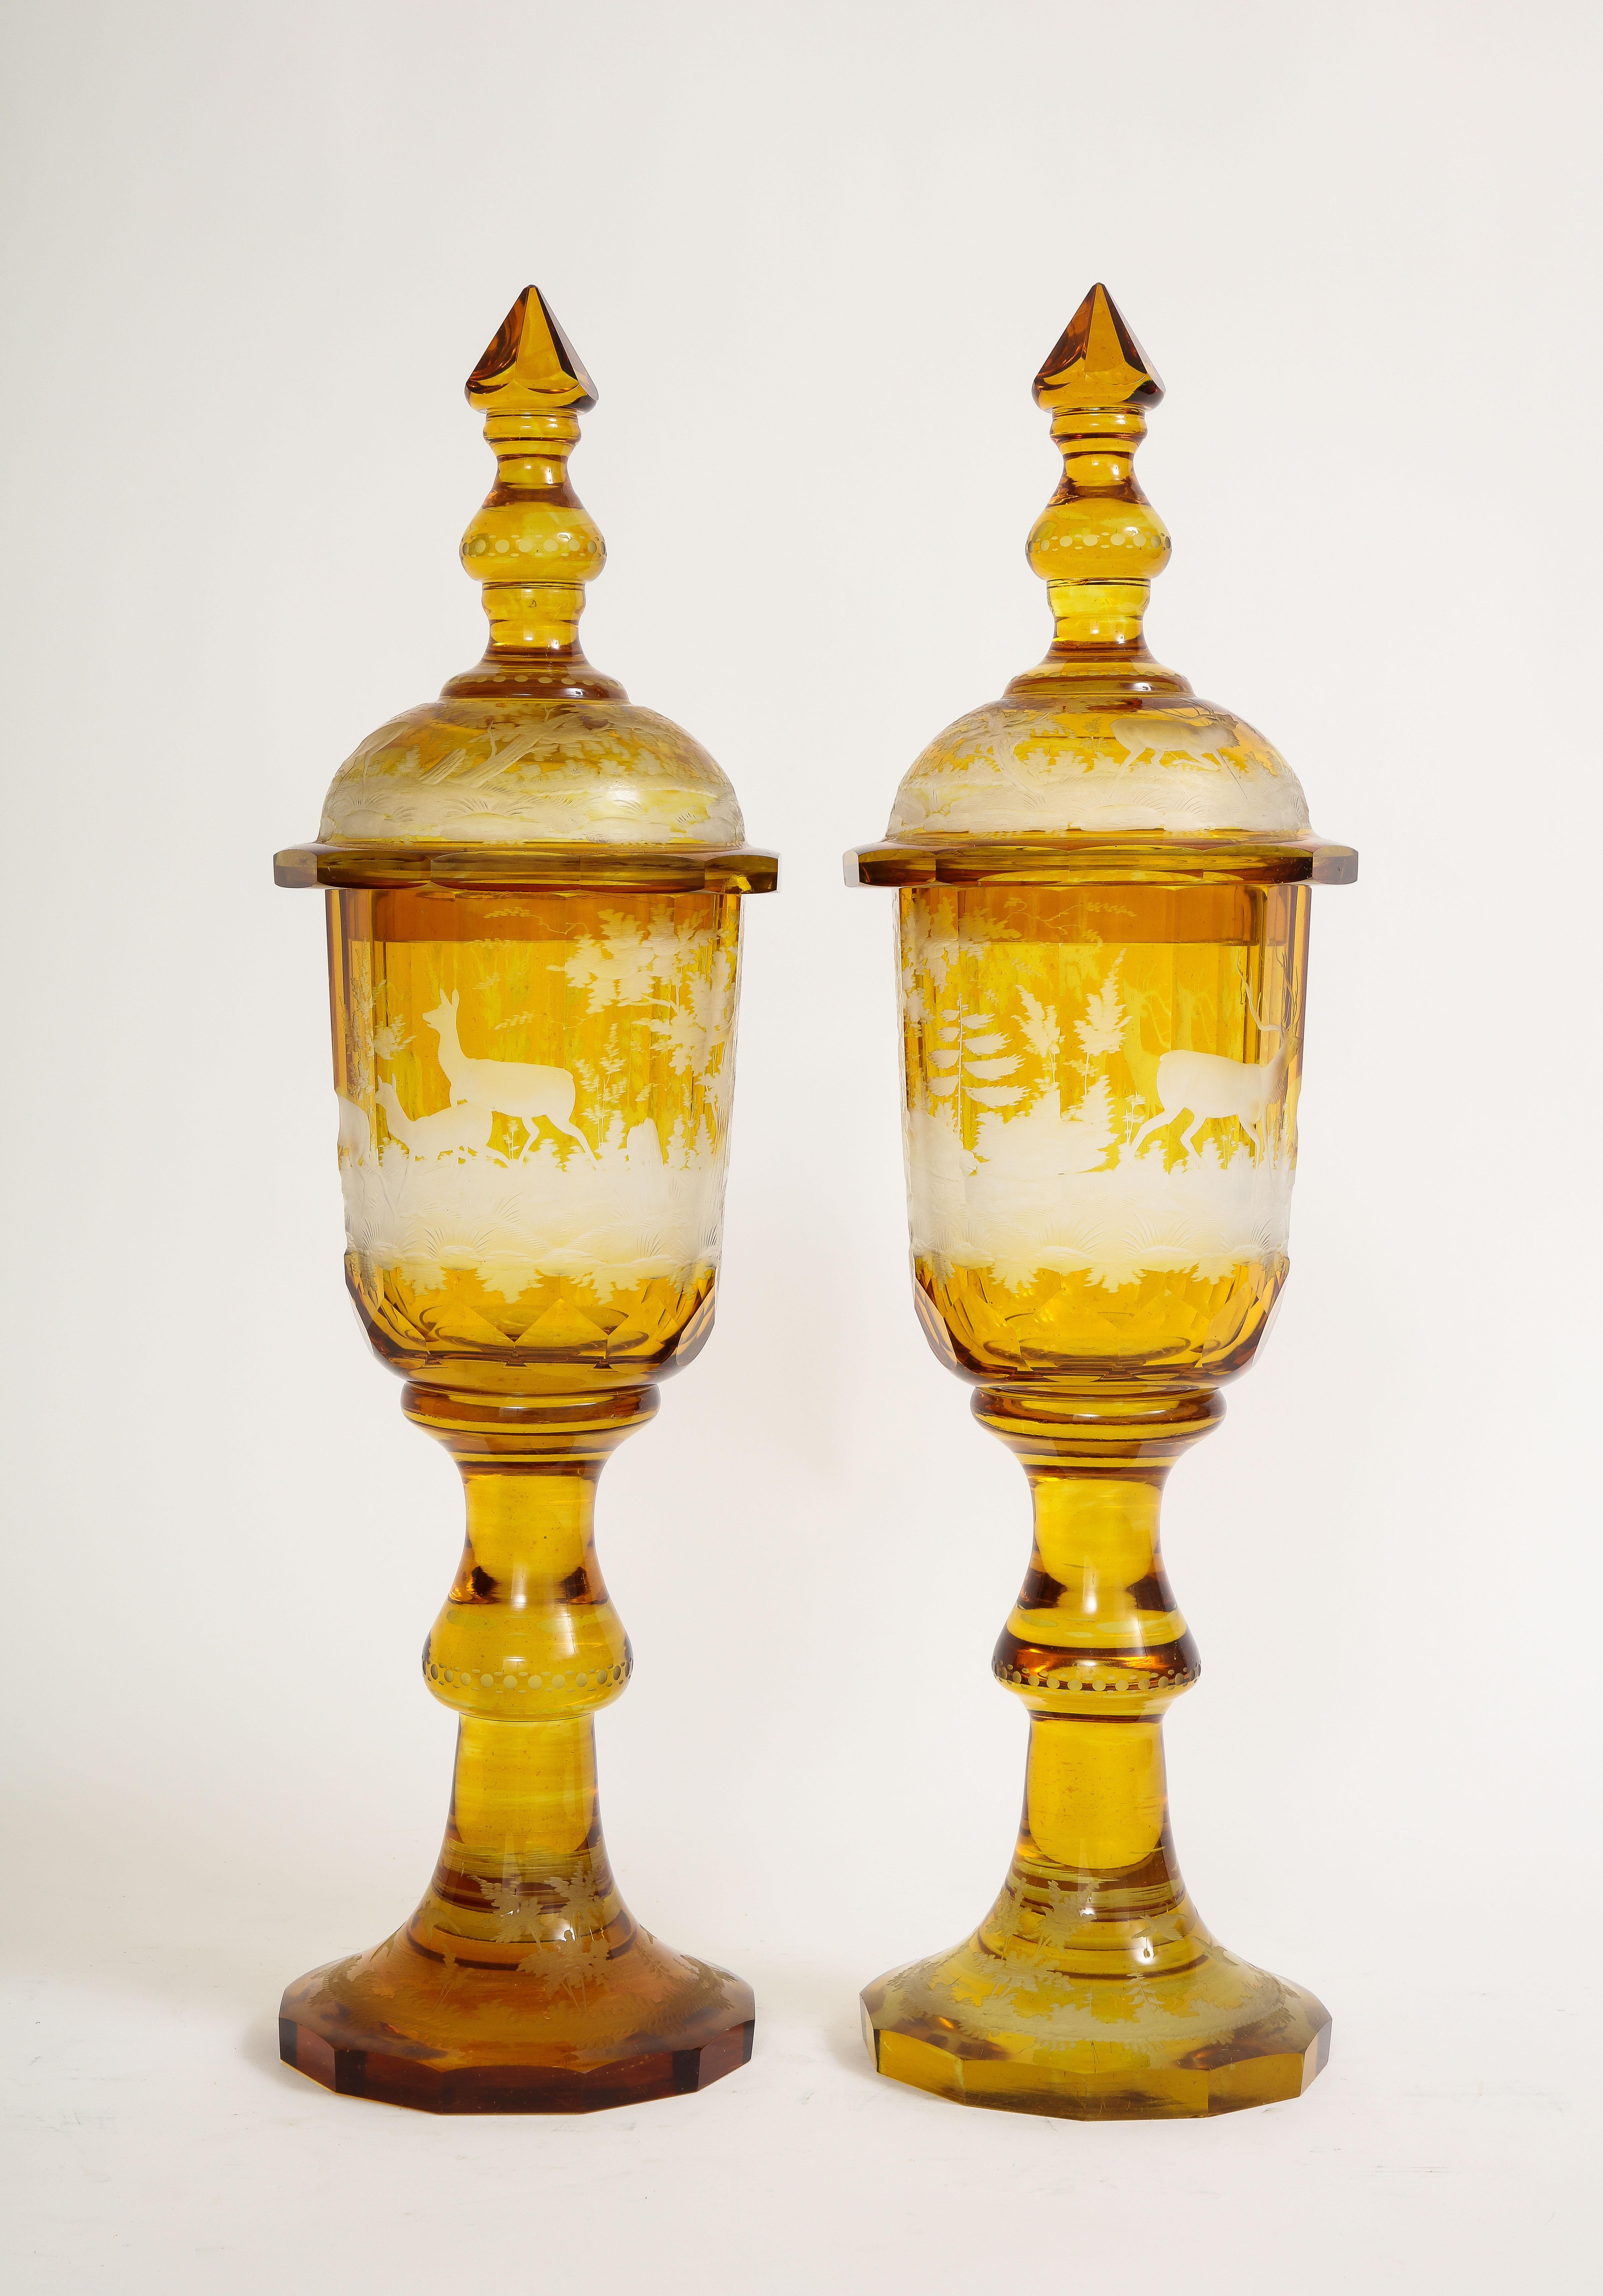 A Beautiful Pair of Amber Crystal Hand-Carved and Etched Covered Pokals from the 1800s. These exceptional Bohemian treasures feature a remarkable cut to clear glass, adorned with a captivating array of ornate designs. Surrounding the body of each